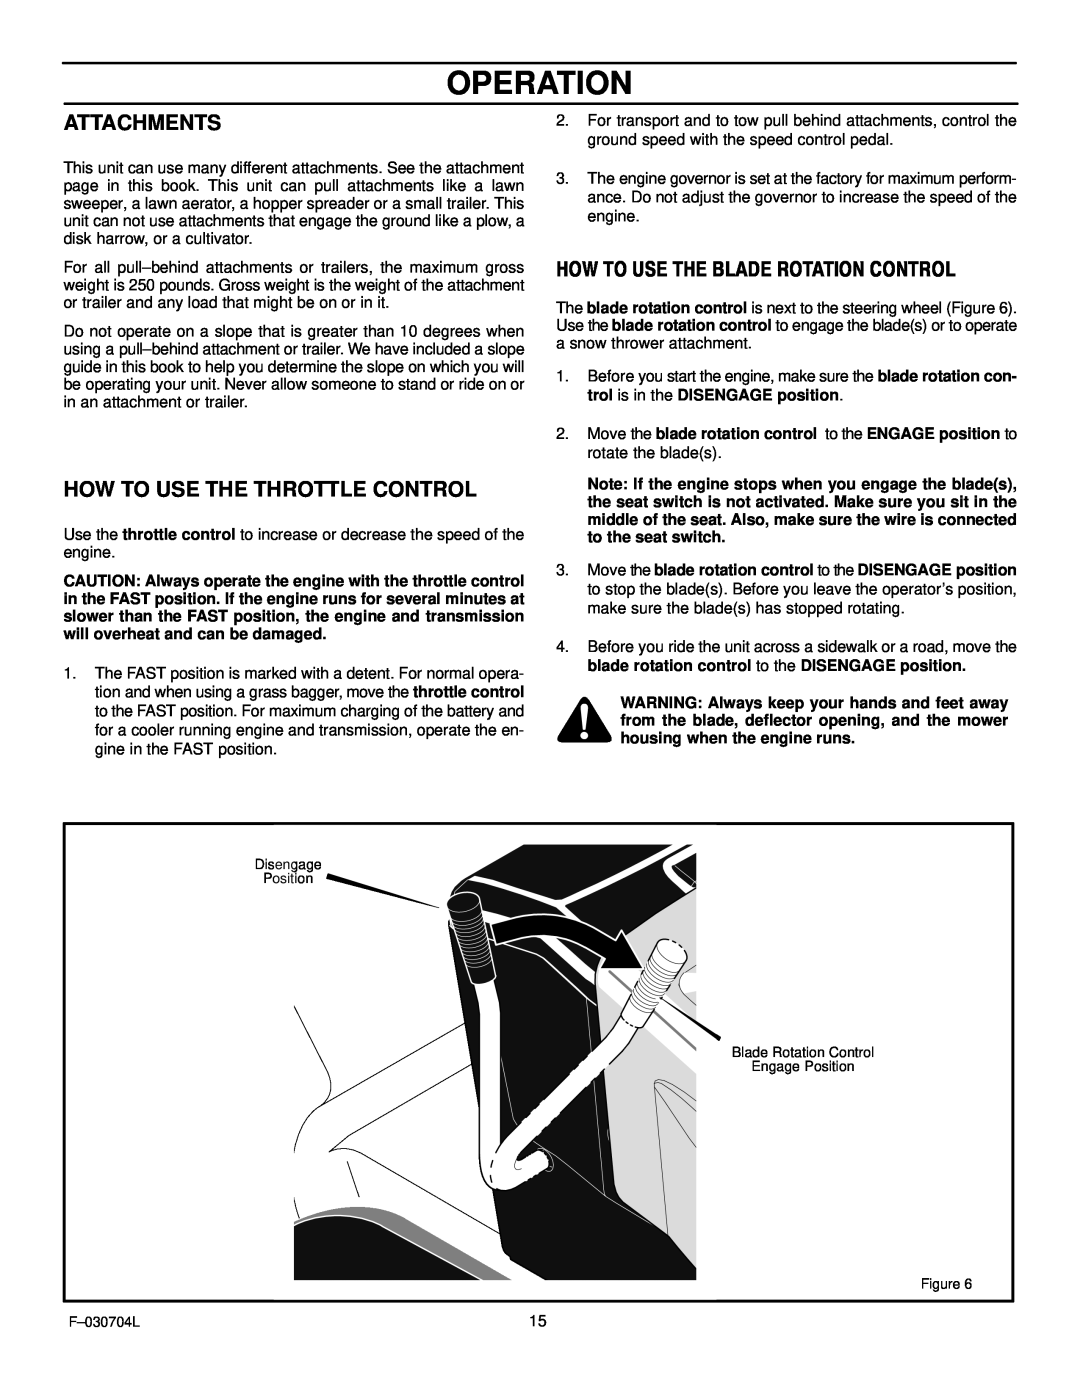 Murray 425303x92B manual Operation, Attachments, How To Use The Throttle Control, How To Use The Blade Rotation Control 